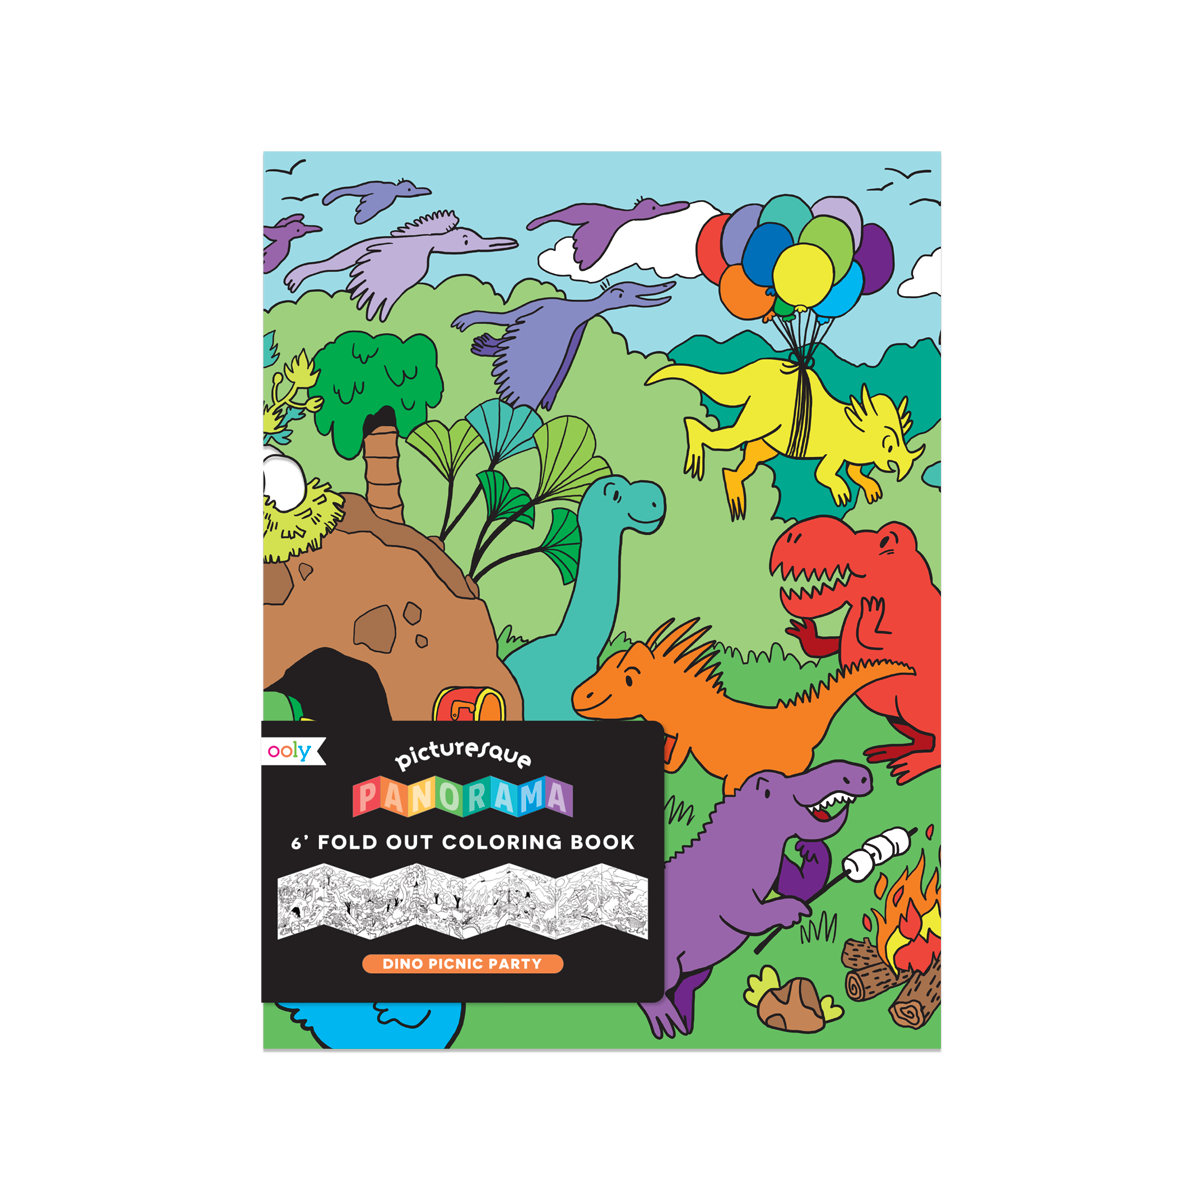 OOLY cover of Picturesque Panorama Dino Picnic Party coloring book 